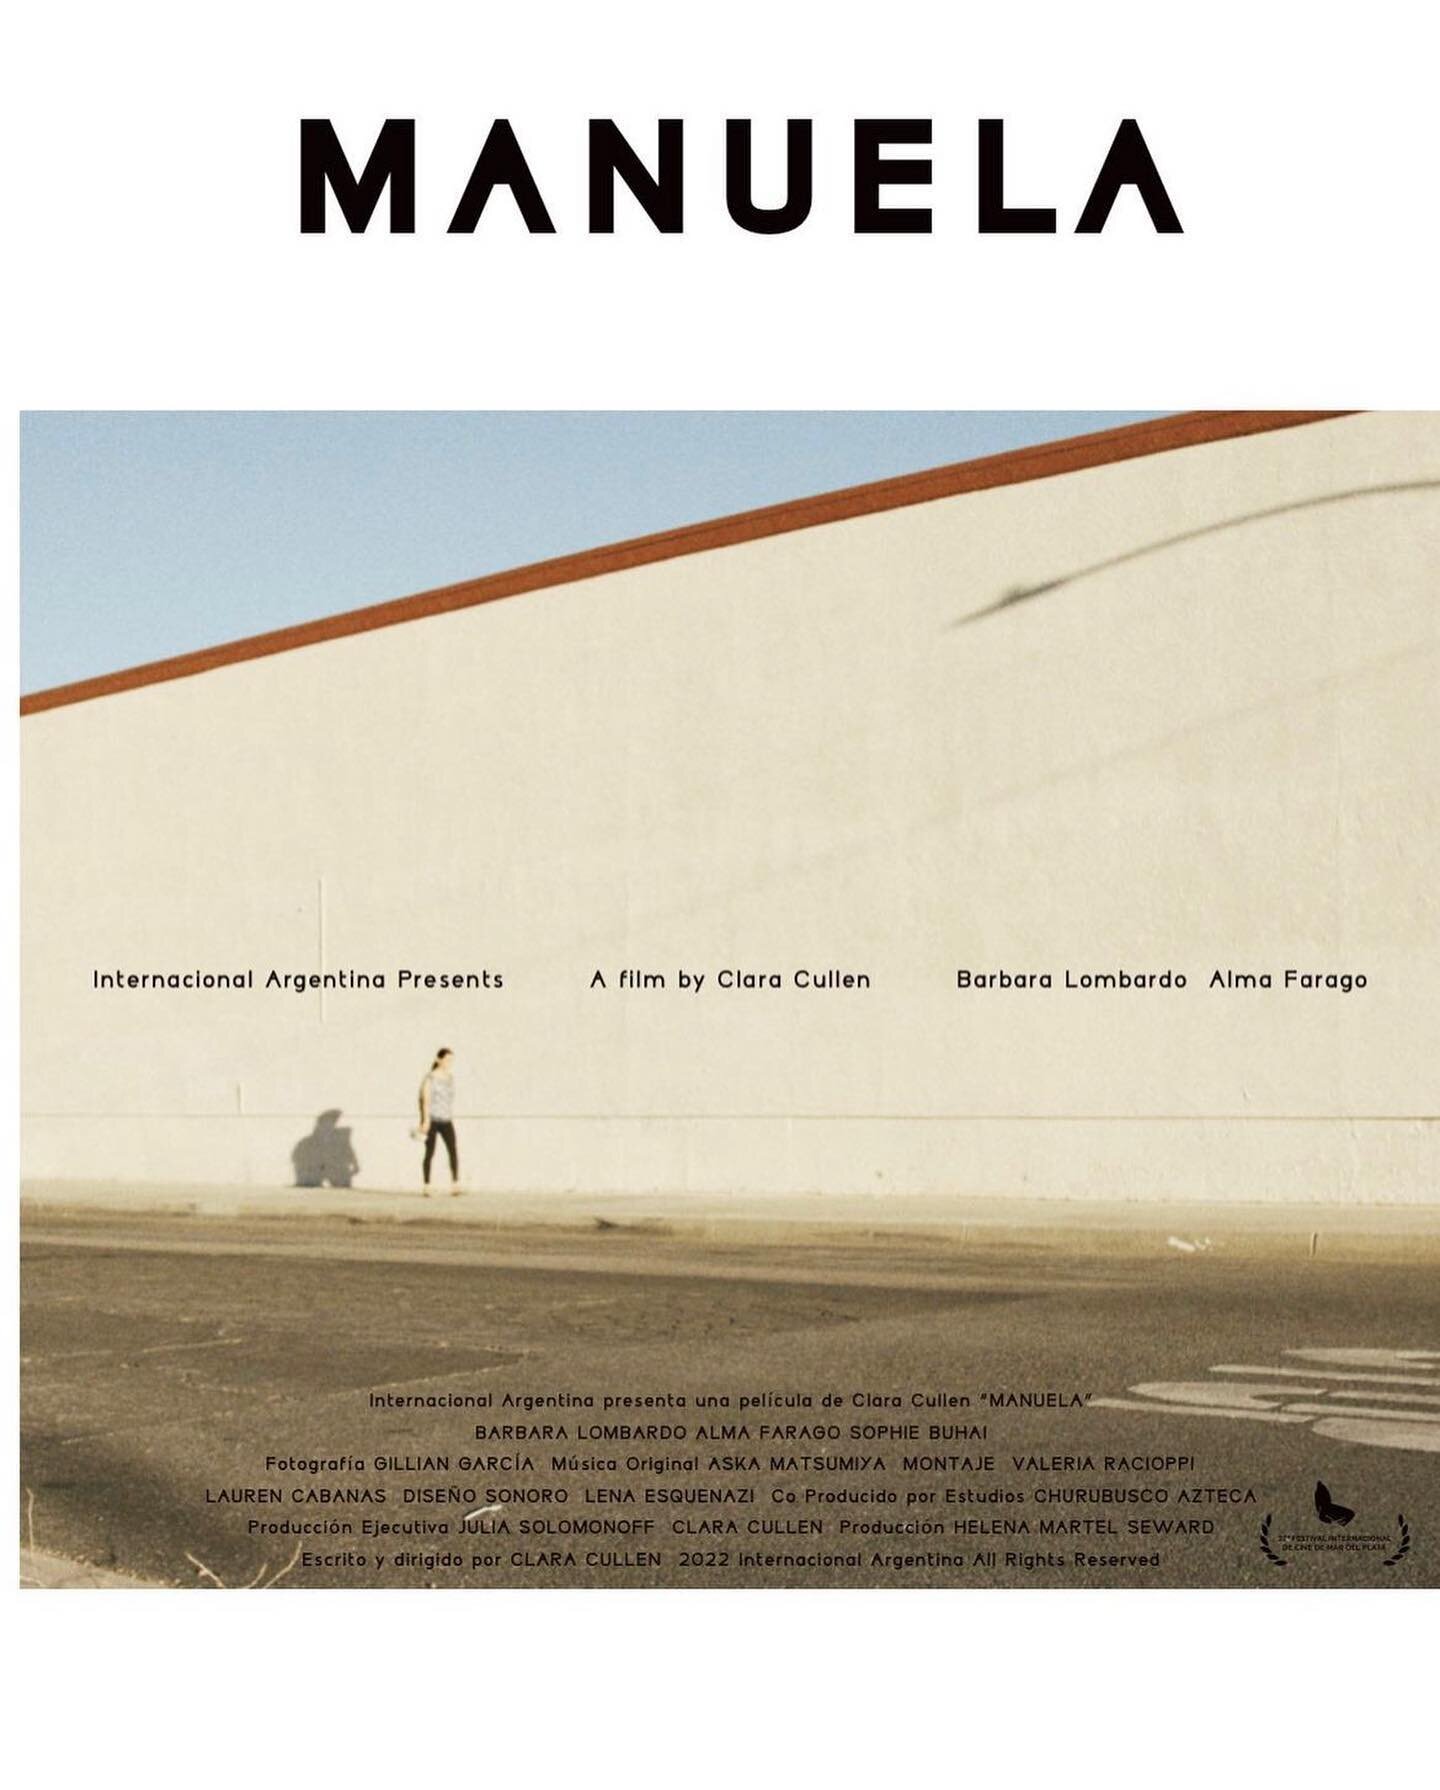 Manuela dir by @claracullen will premiere at Mar Del Plata Film Festival on November 10th 19:30h.

Always love making music for Clara and in our pursuit of how raw we can make it and capture the beauty. 

Very very special film to premiere at her hom